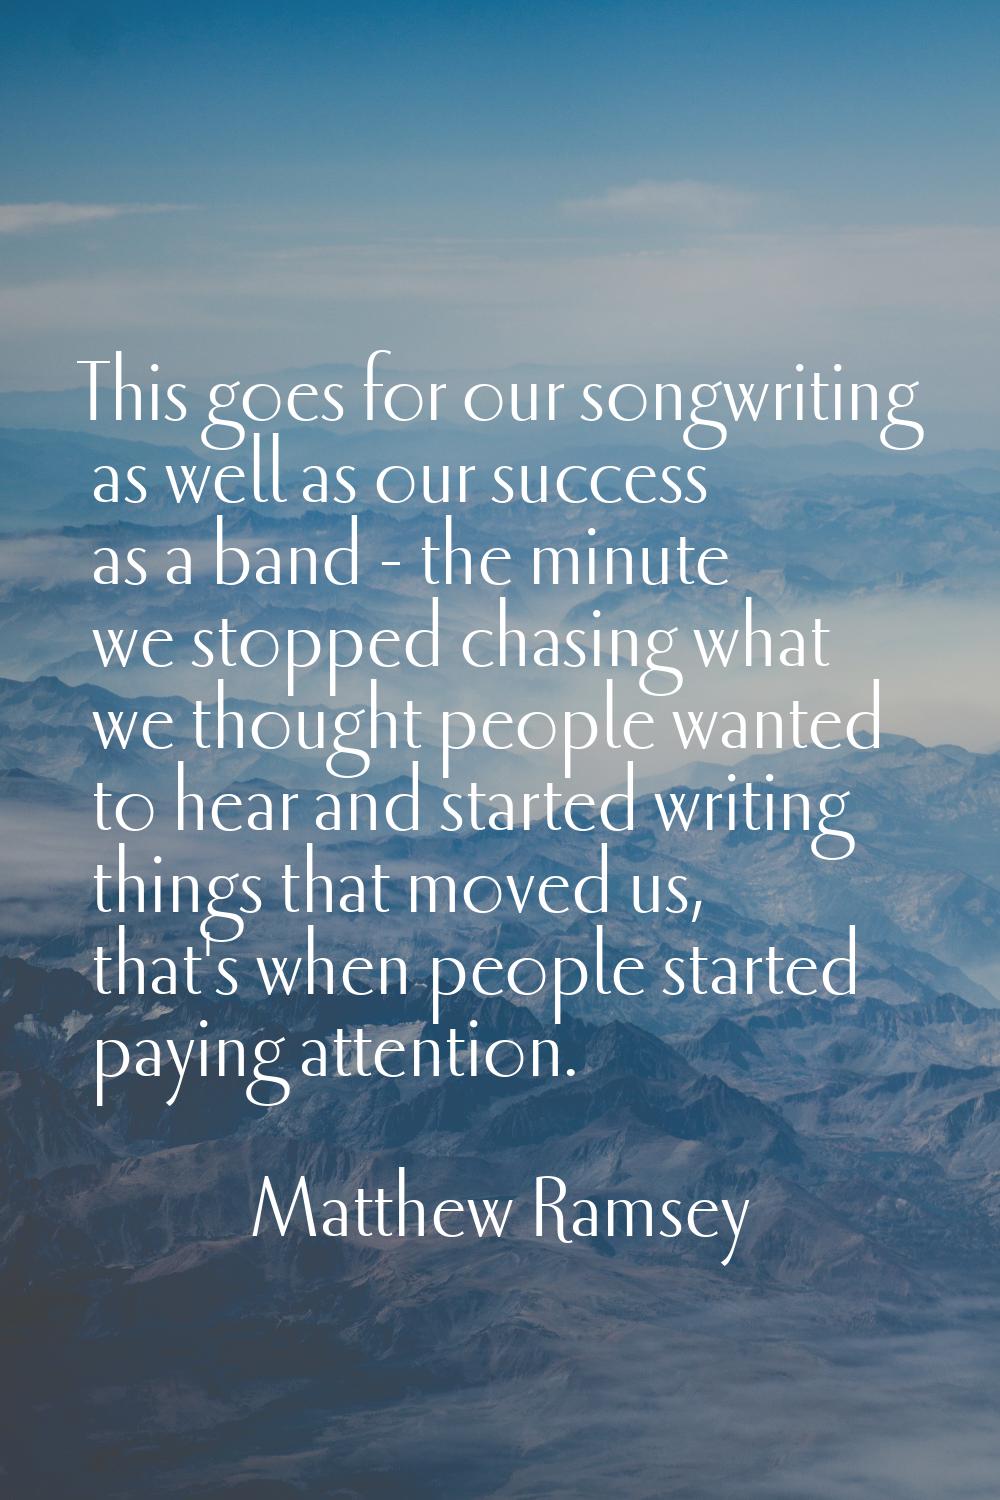 This goes for our songwriting as well as our success as a band - the minute we stopped chasing what